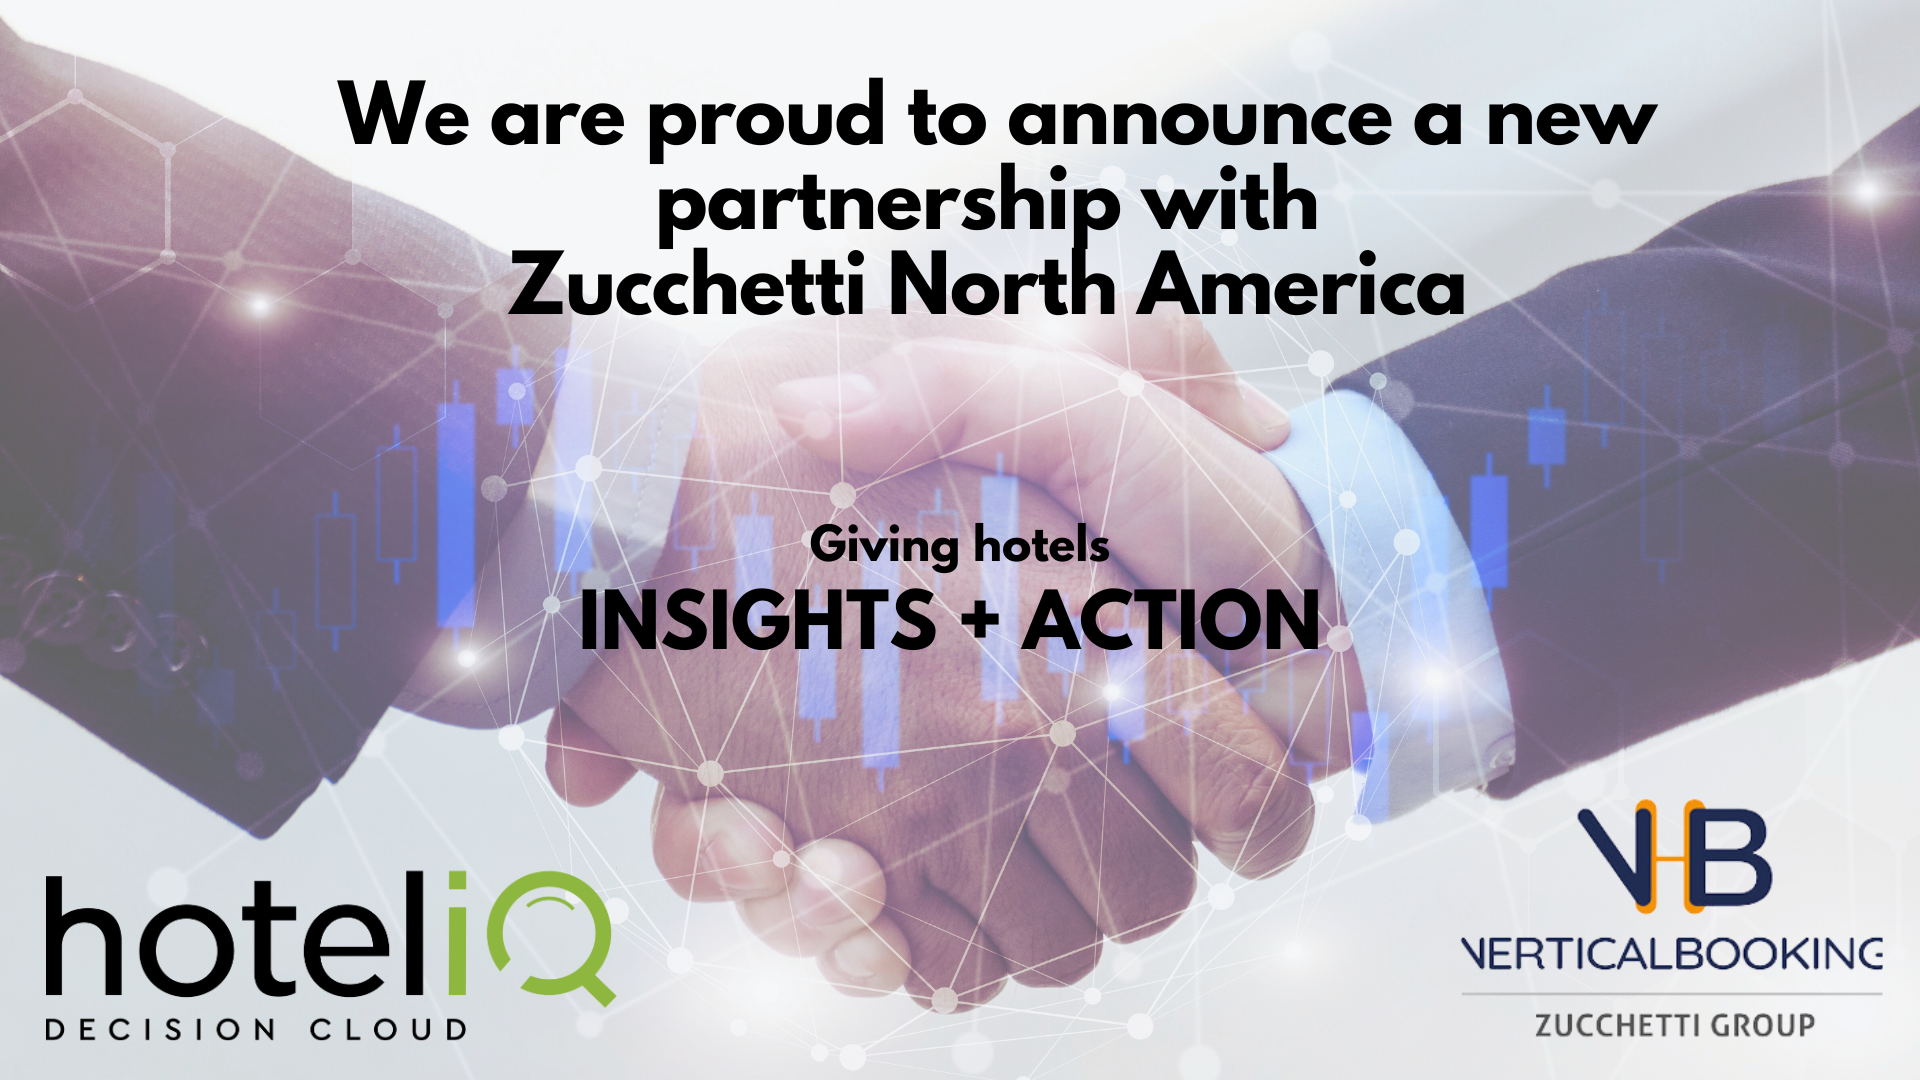 Intelligent Hospitality developer and owner of HotelIQ decision cloud announce partnership with Zucchetti North America